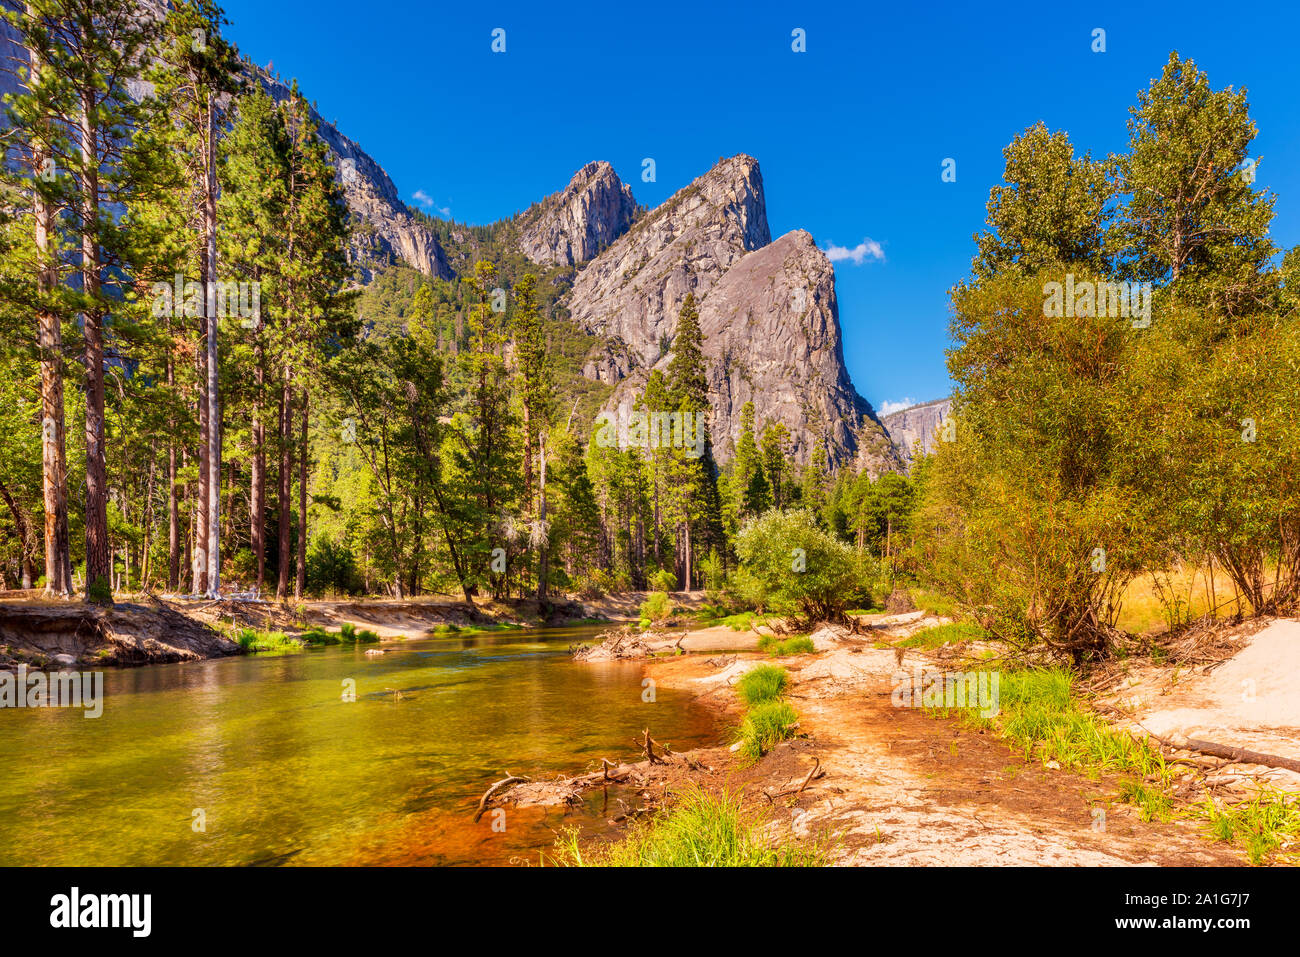 Three Brothers Rock Formation in Yosemite National Park, California, USA Stock Photo